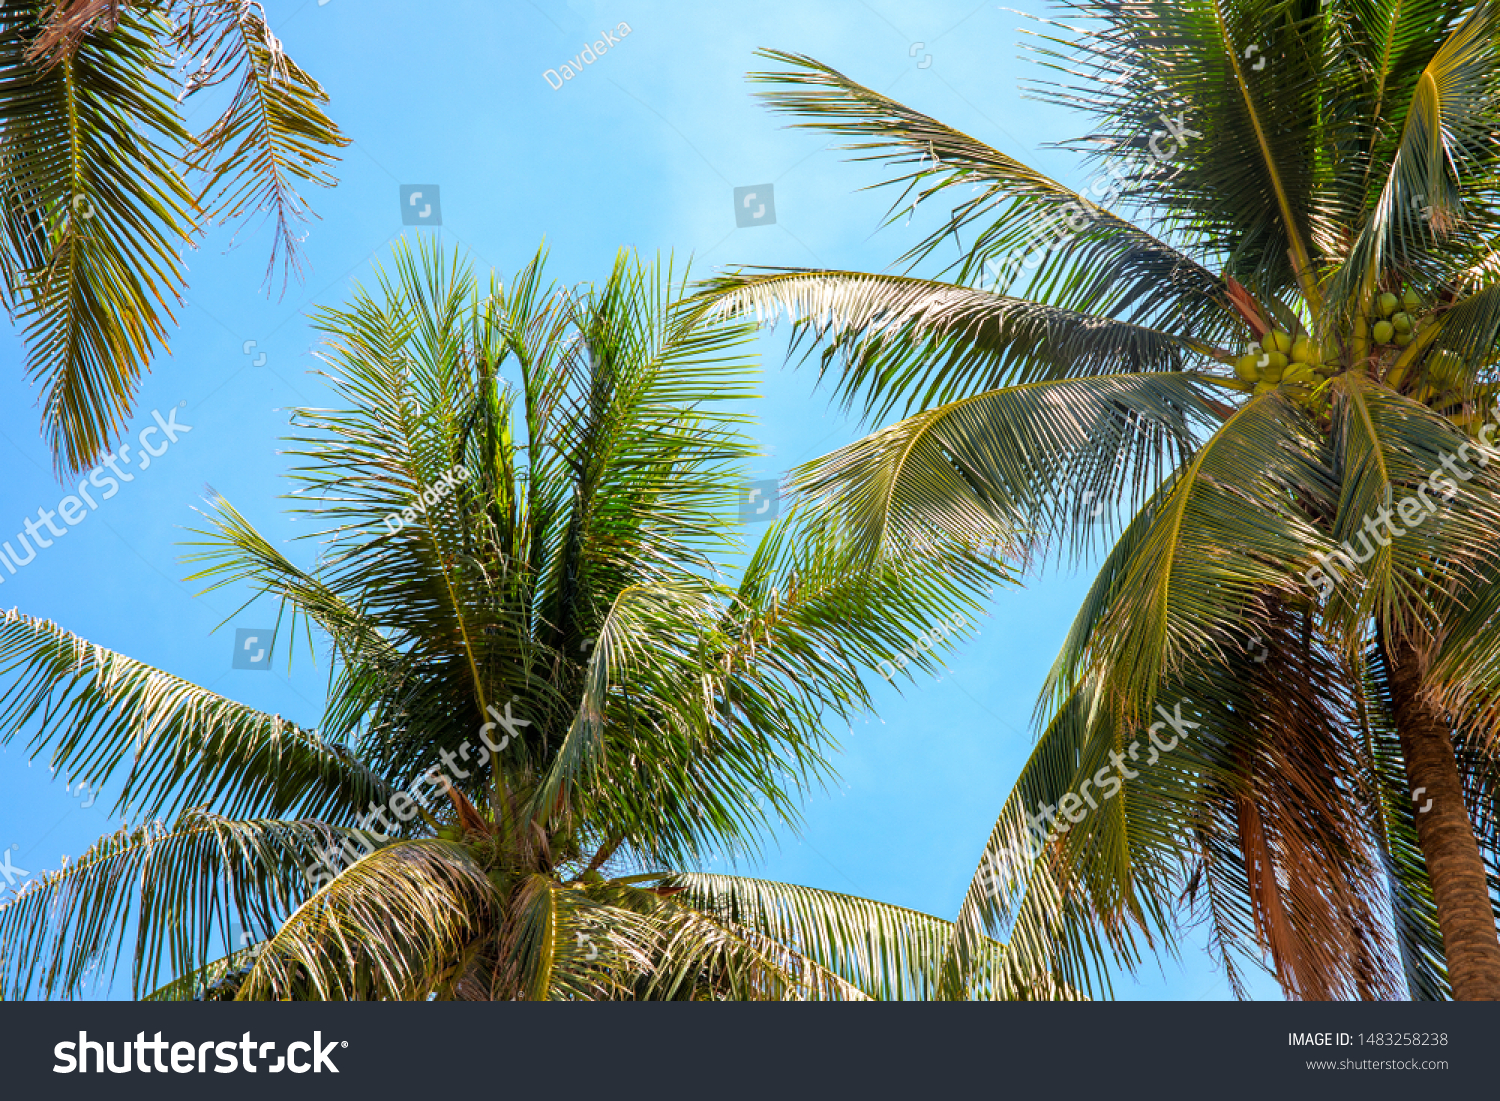 Coco palm crown on blue sky background, tropical nature photo. Palm tree in sunny sky banner template. Summer travel or honeymoon. Fluffy palm leaf on wind. Tropic jungle idyllic landscape #1483258238